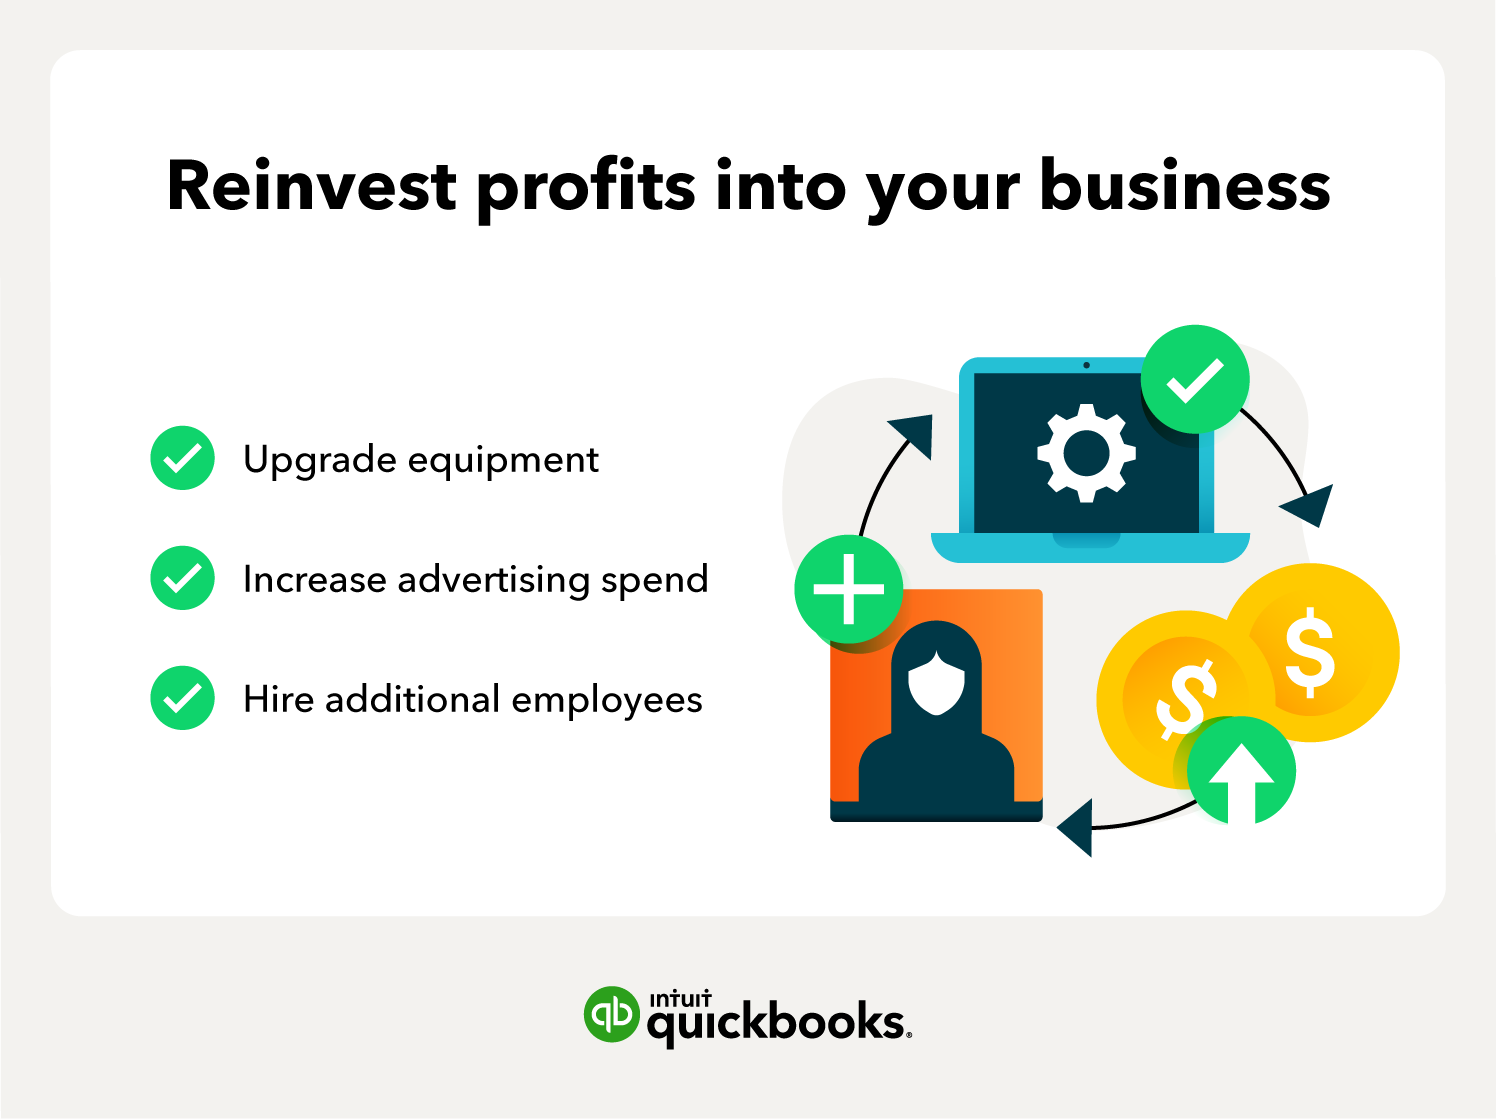 Business growth: reinvesting profits into your business